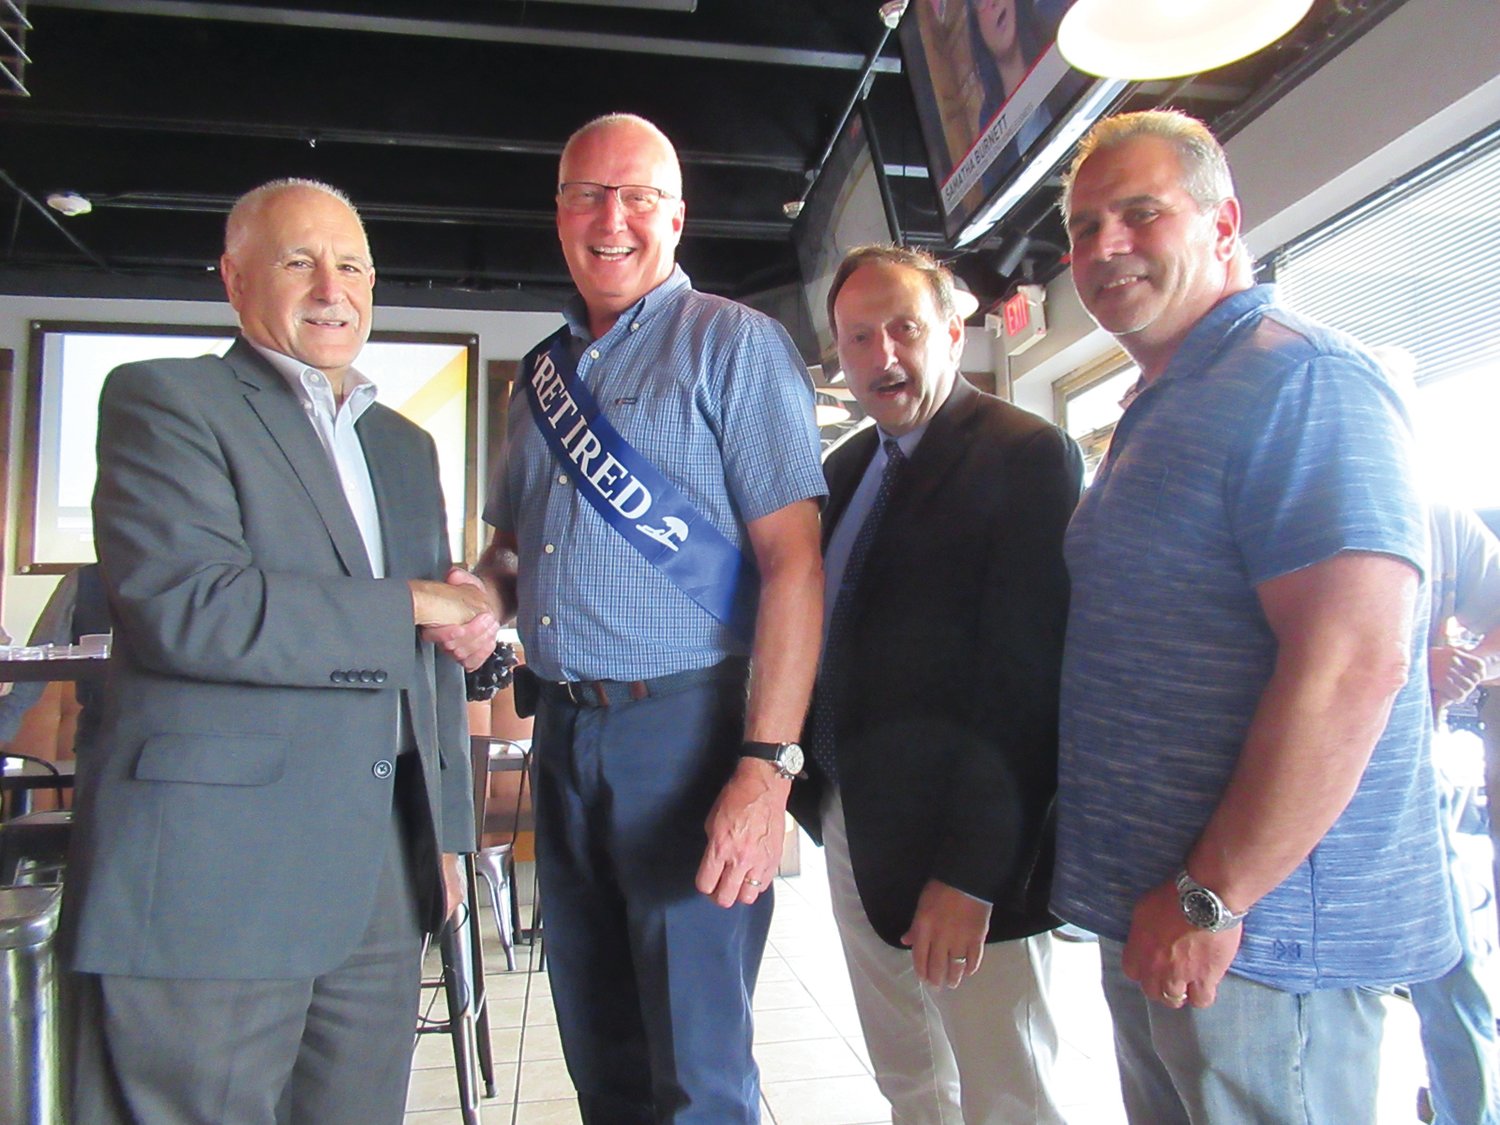 MAIN MAN: Johnston Mayor Joseph Polisena, joined by School Superintendent Dr. Bernard DiLullo and School Committee Vice Chairman Joseph Rotella, congratulates Dave Cournoyer on his retirement from the School Department, where he served with dignity and respect for all